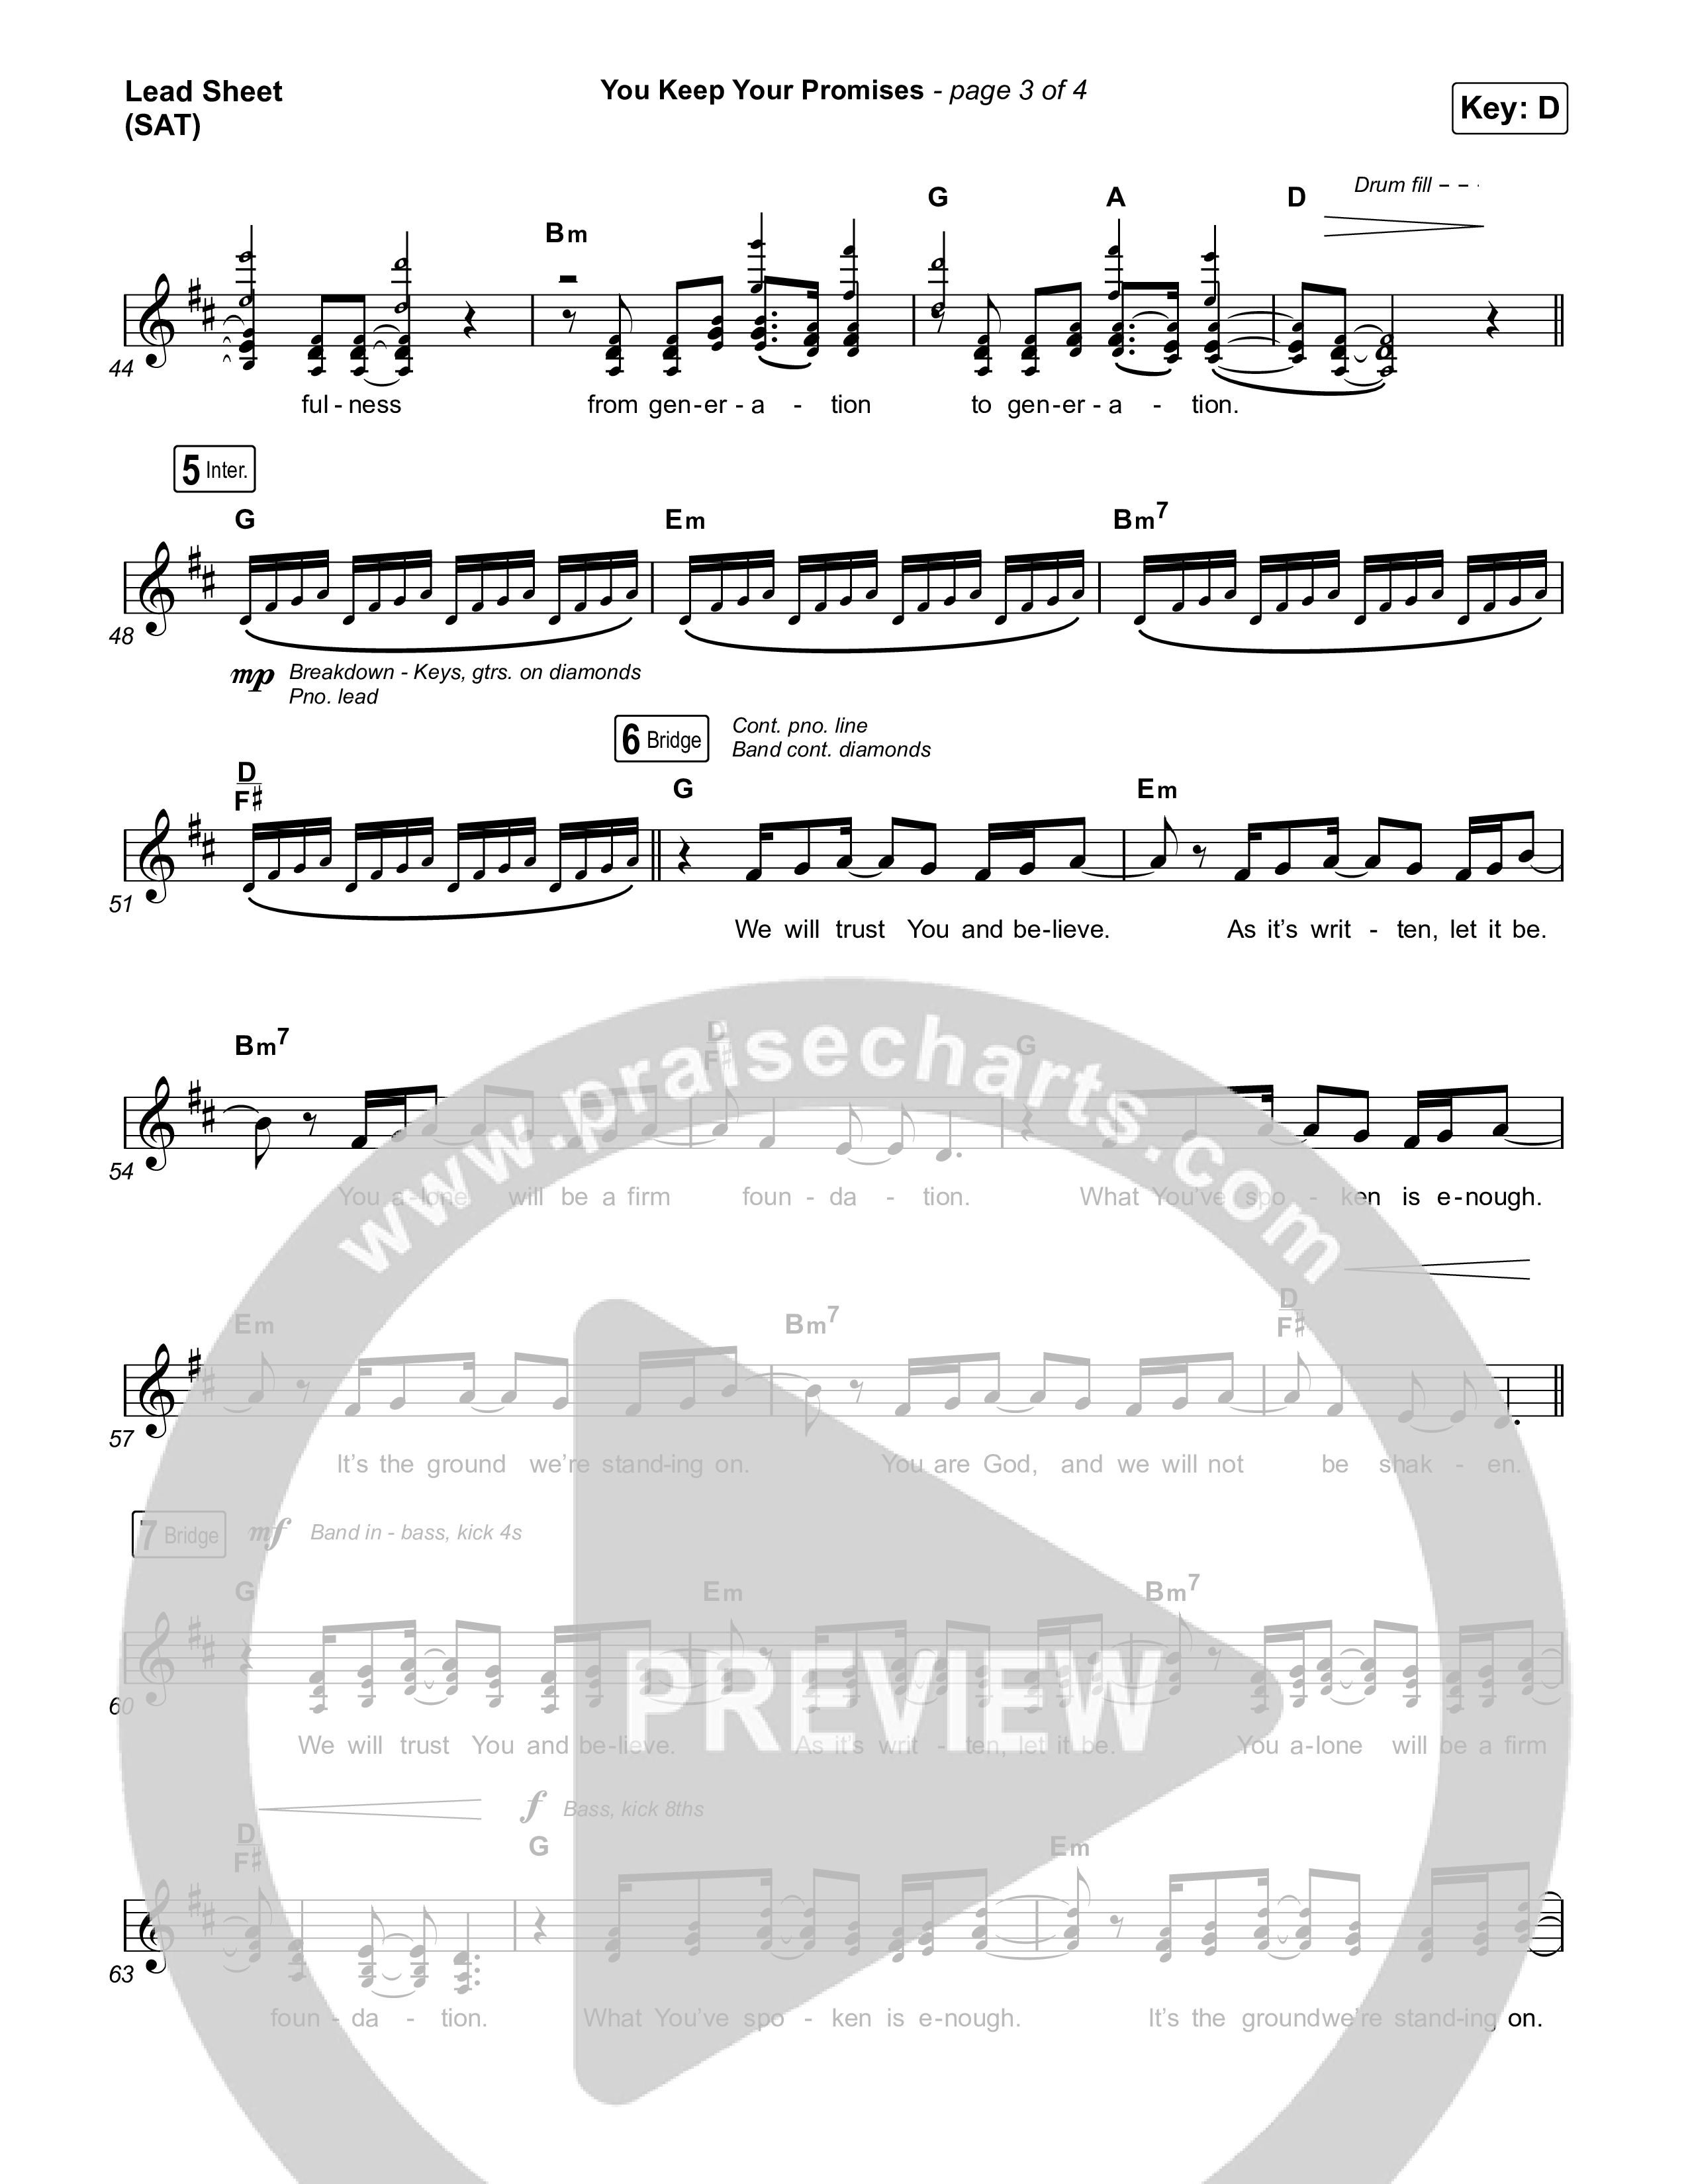 You Keep Your Promises Lead Sheet (SAT) (Charity Gayle)